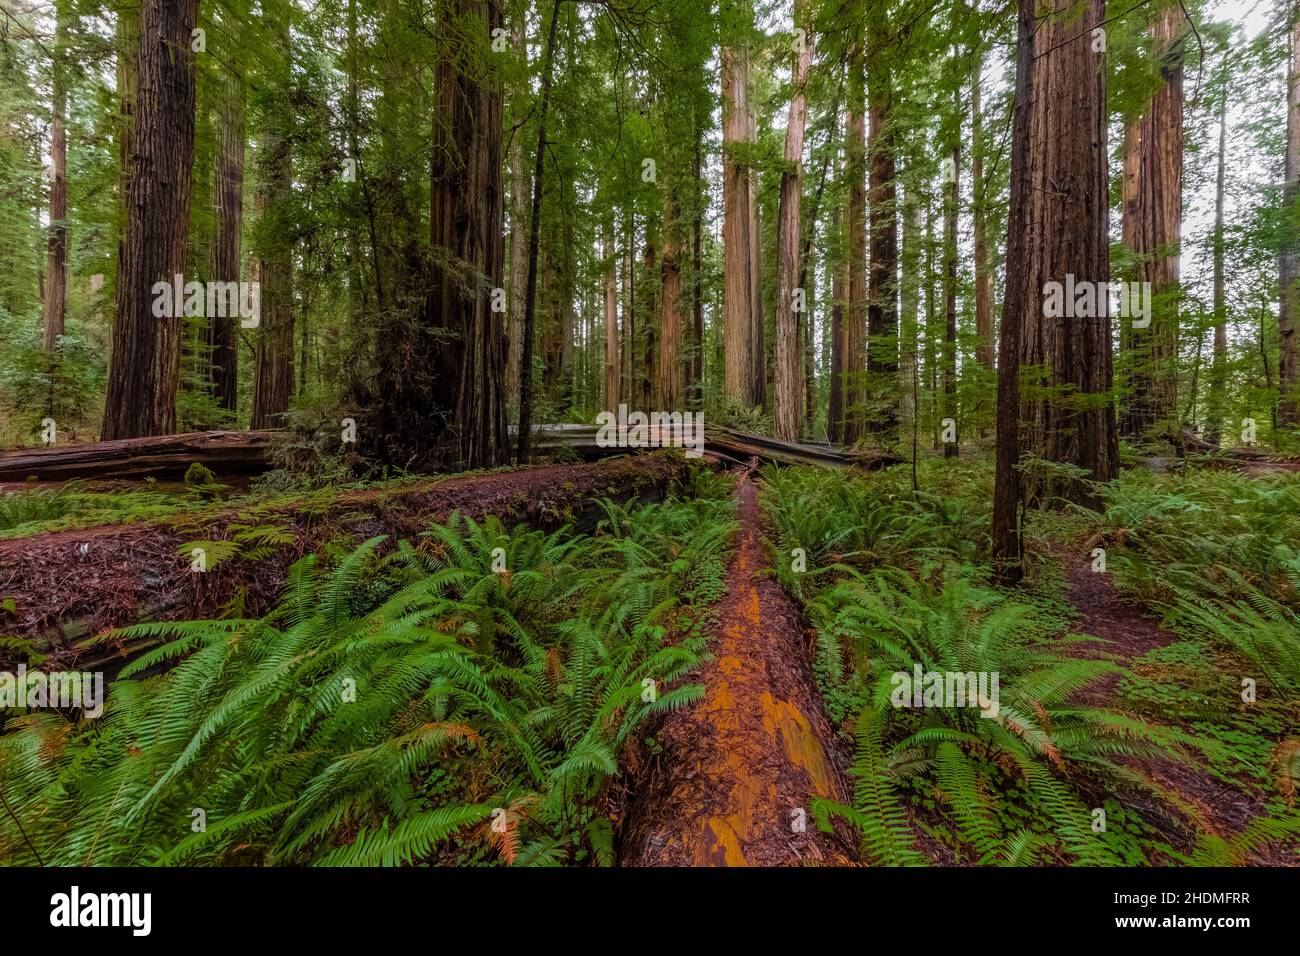 Fallen Coast Redwood Log in Stout Memorial Grove in Jedediah Smith Redwoods State Park in Redwood National and State Parks, California, USA Stockfoto